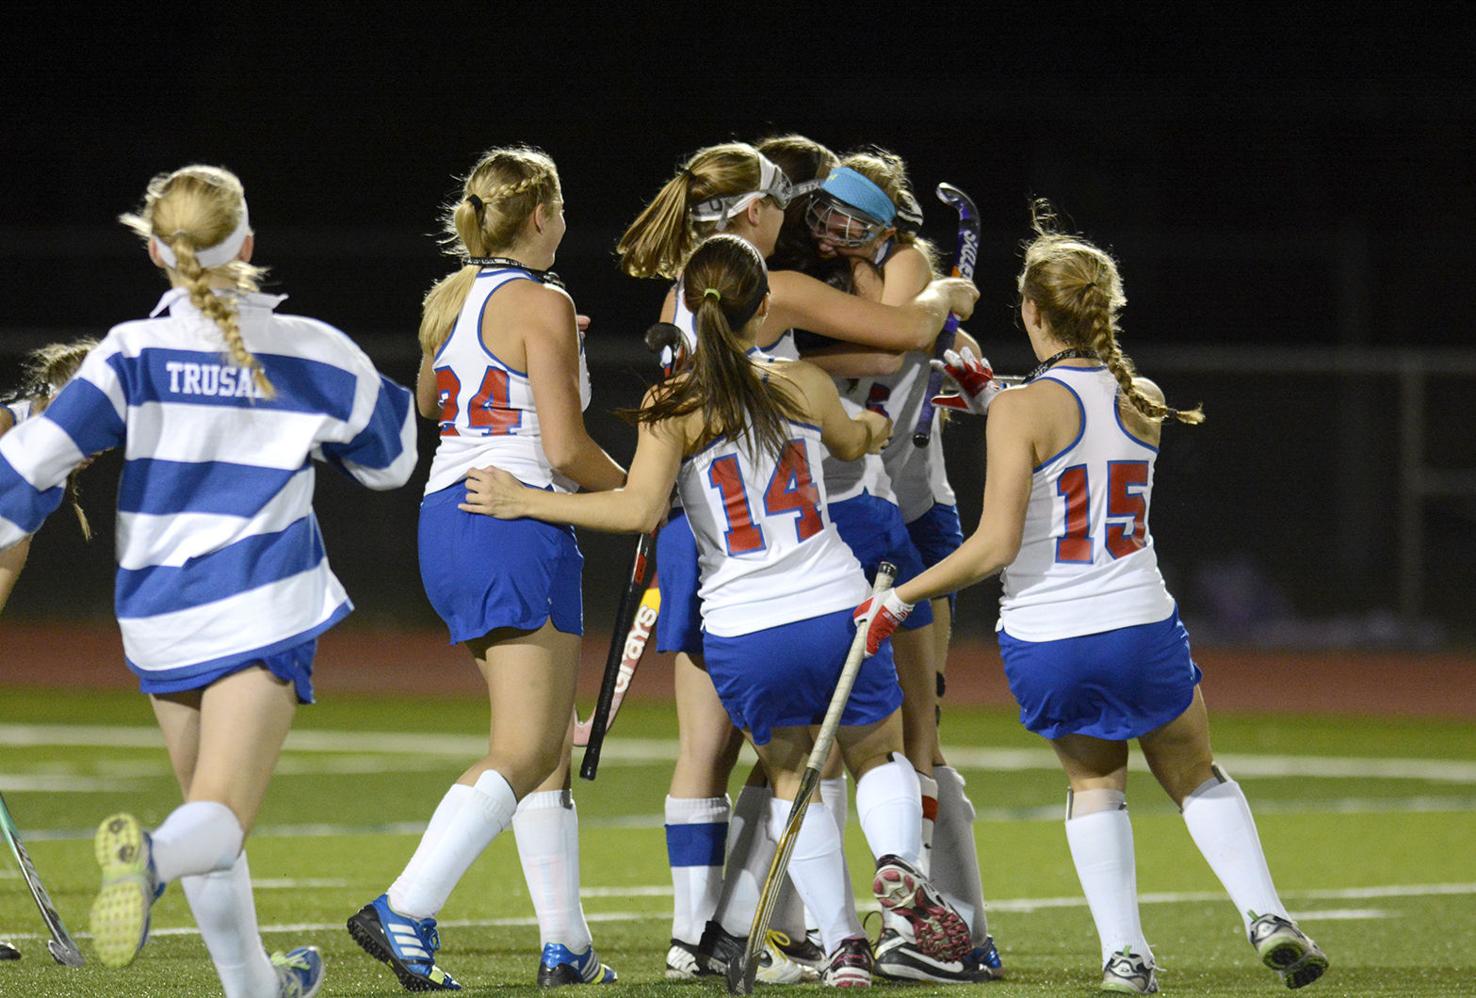 Selinsgrove survives Twin Valley attack in first round of PIAA field